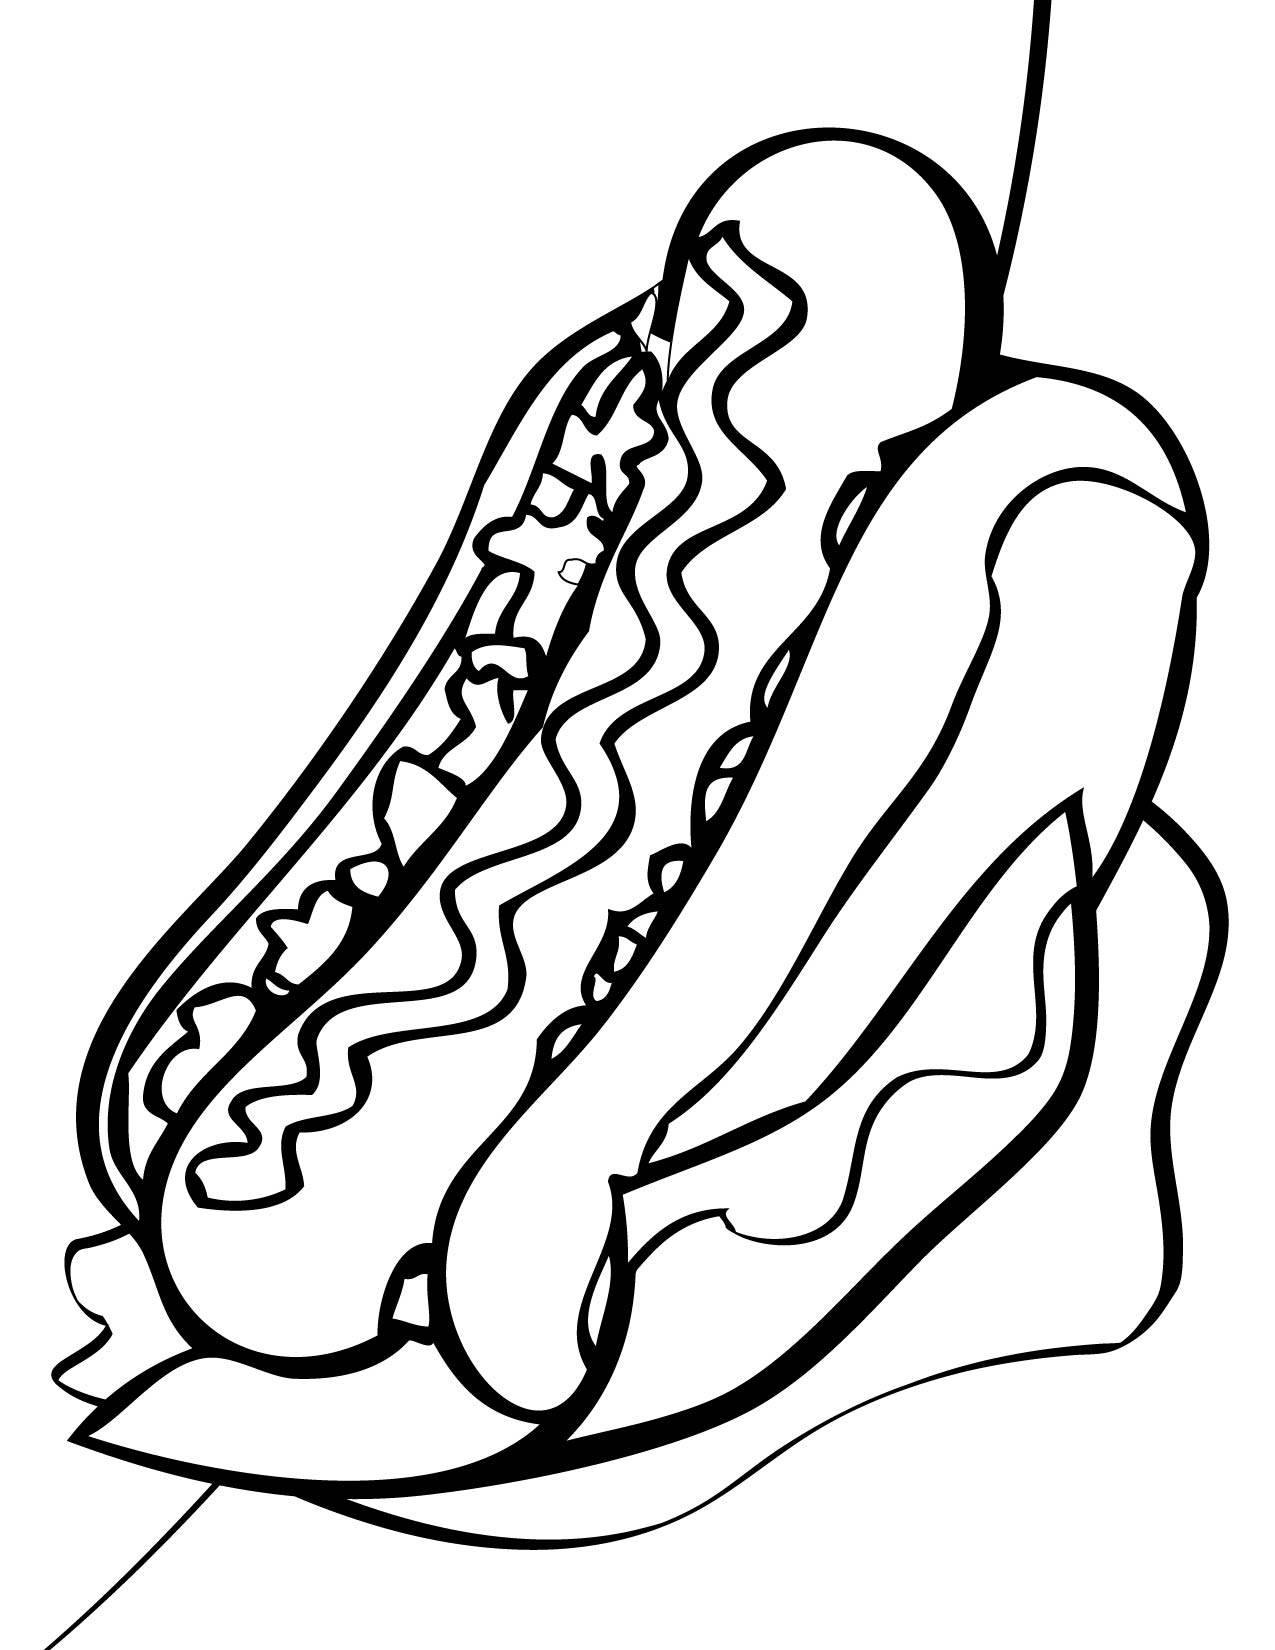 Hot Dog Coloring Page at GetColorings.com | Free printable colorings